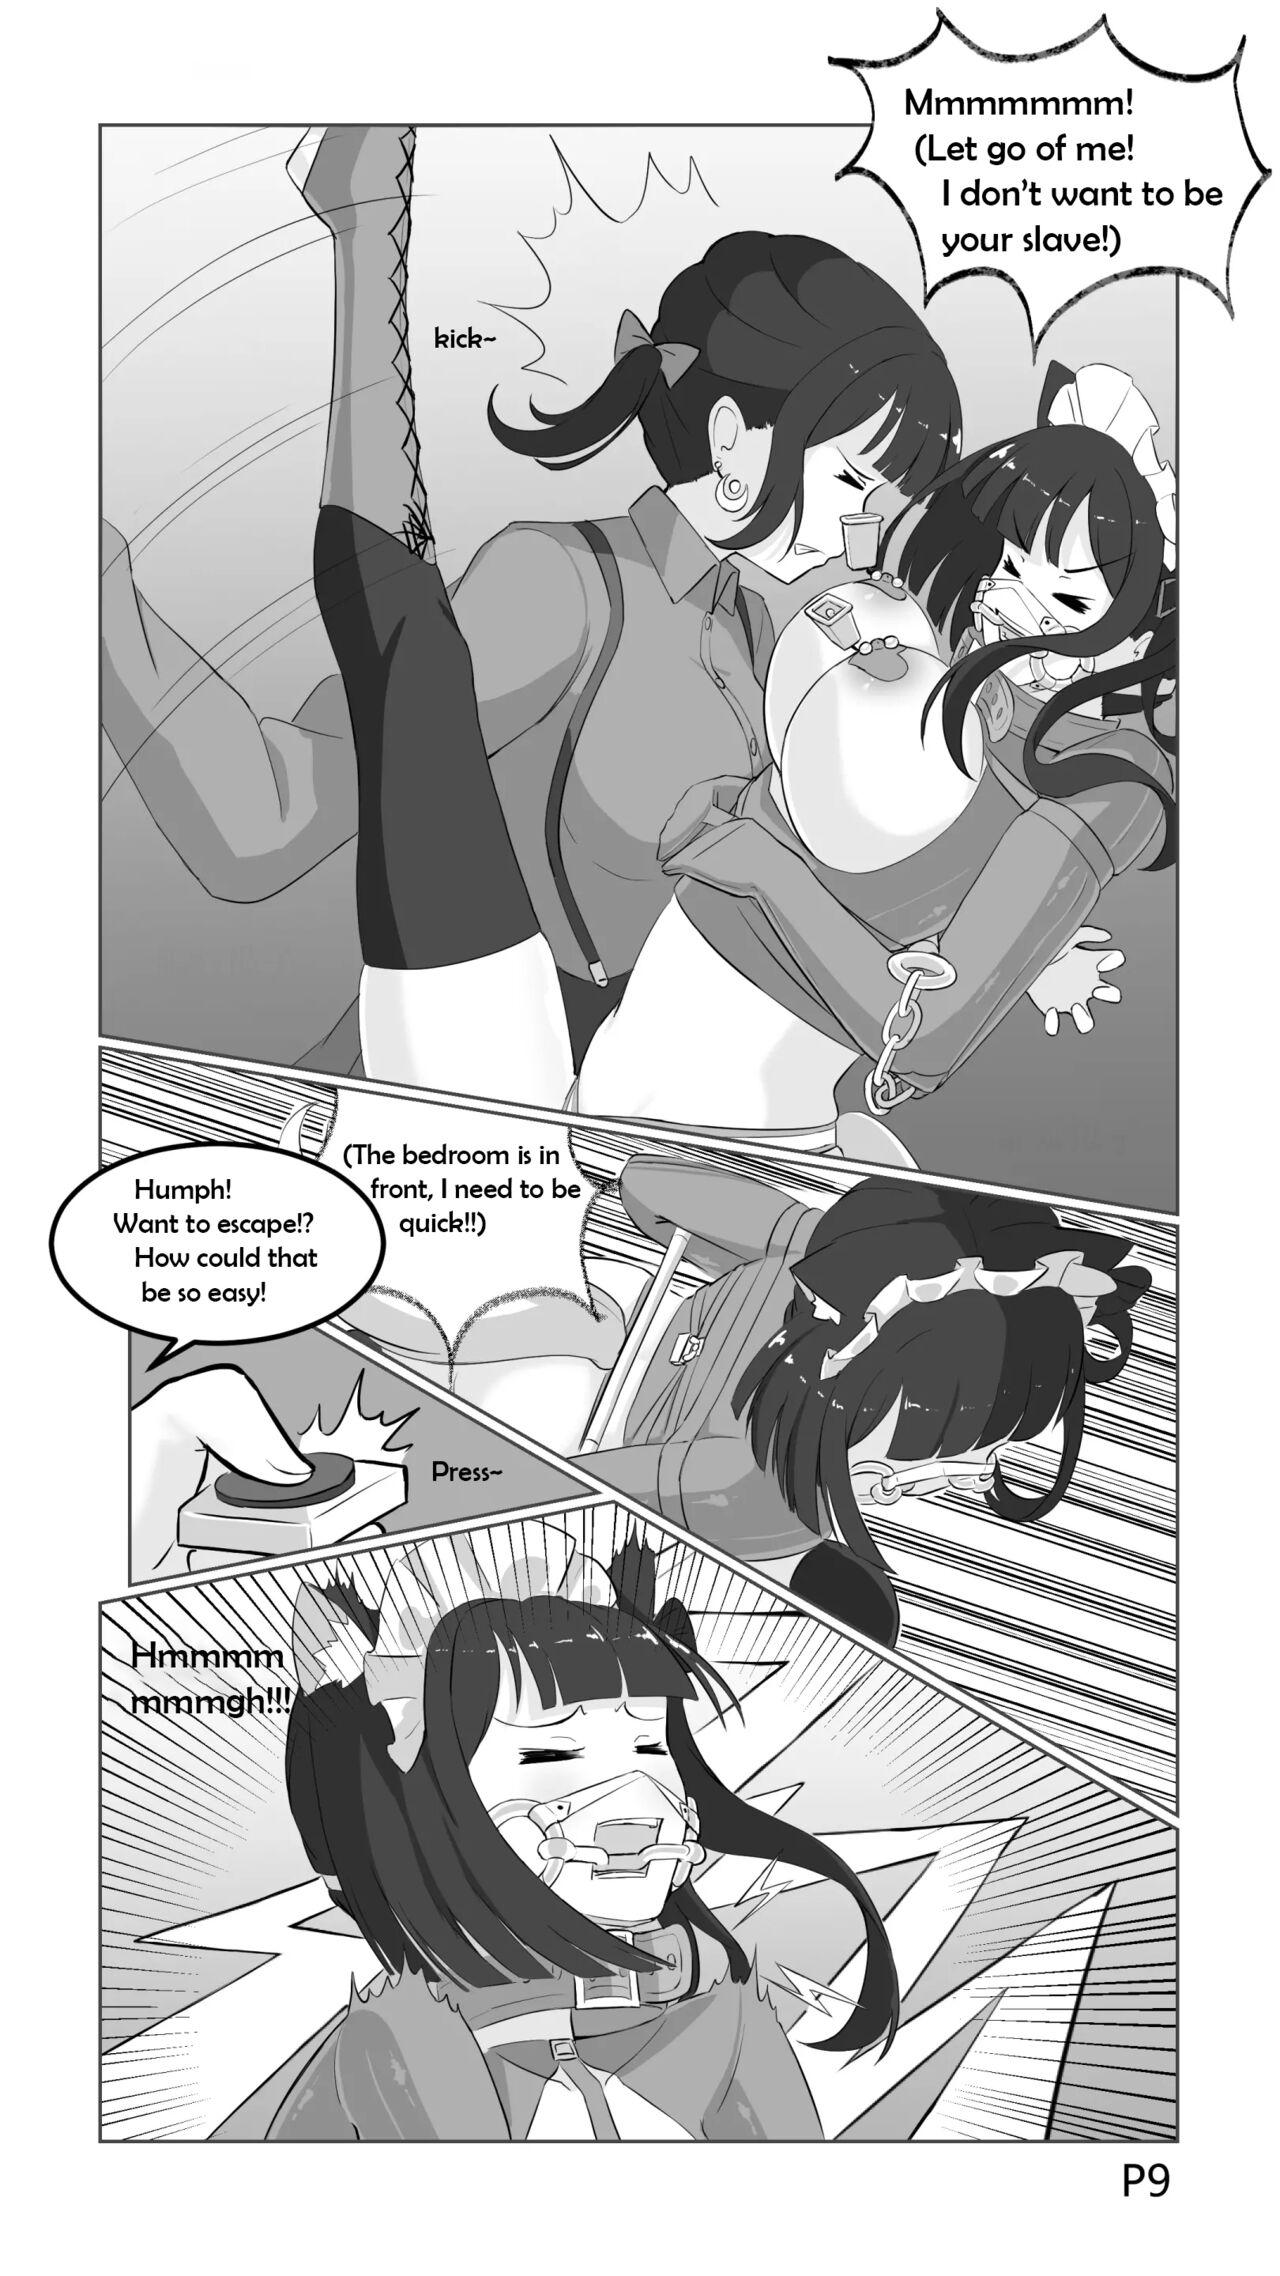 Jacking Trap for catching ponies - Original Uncensored - Page 9